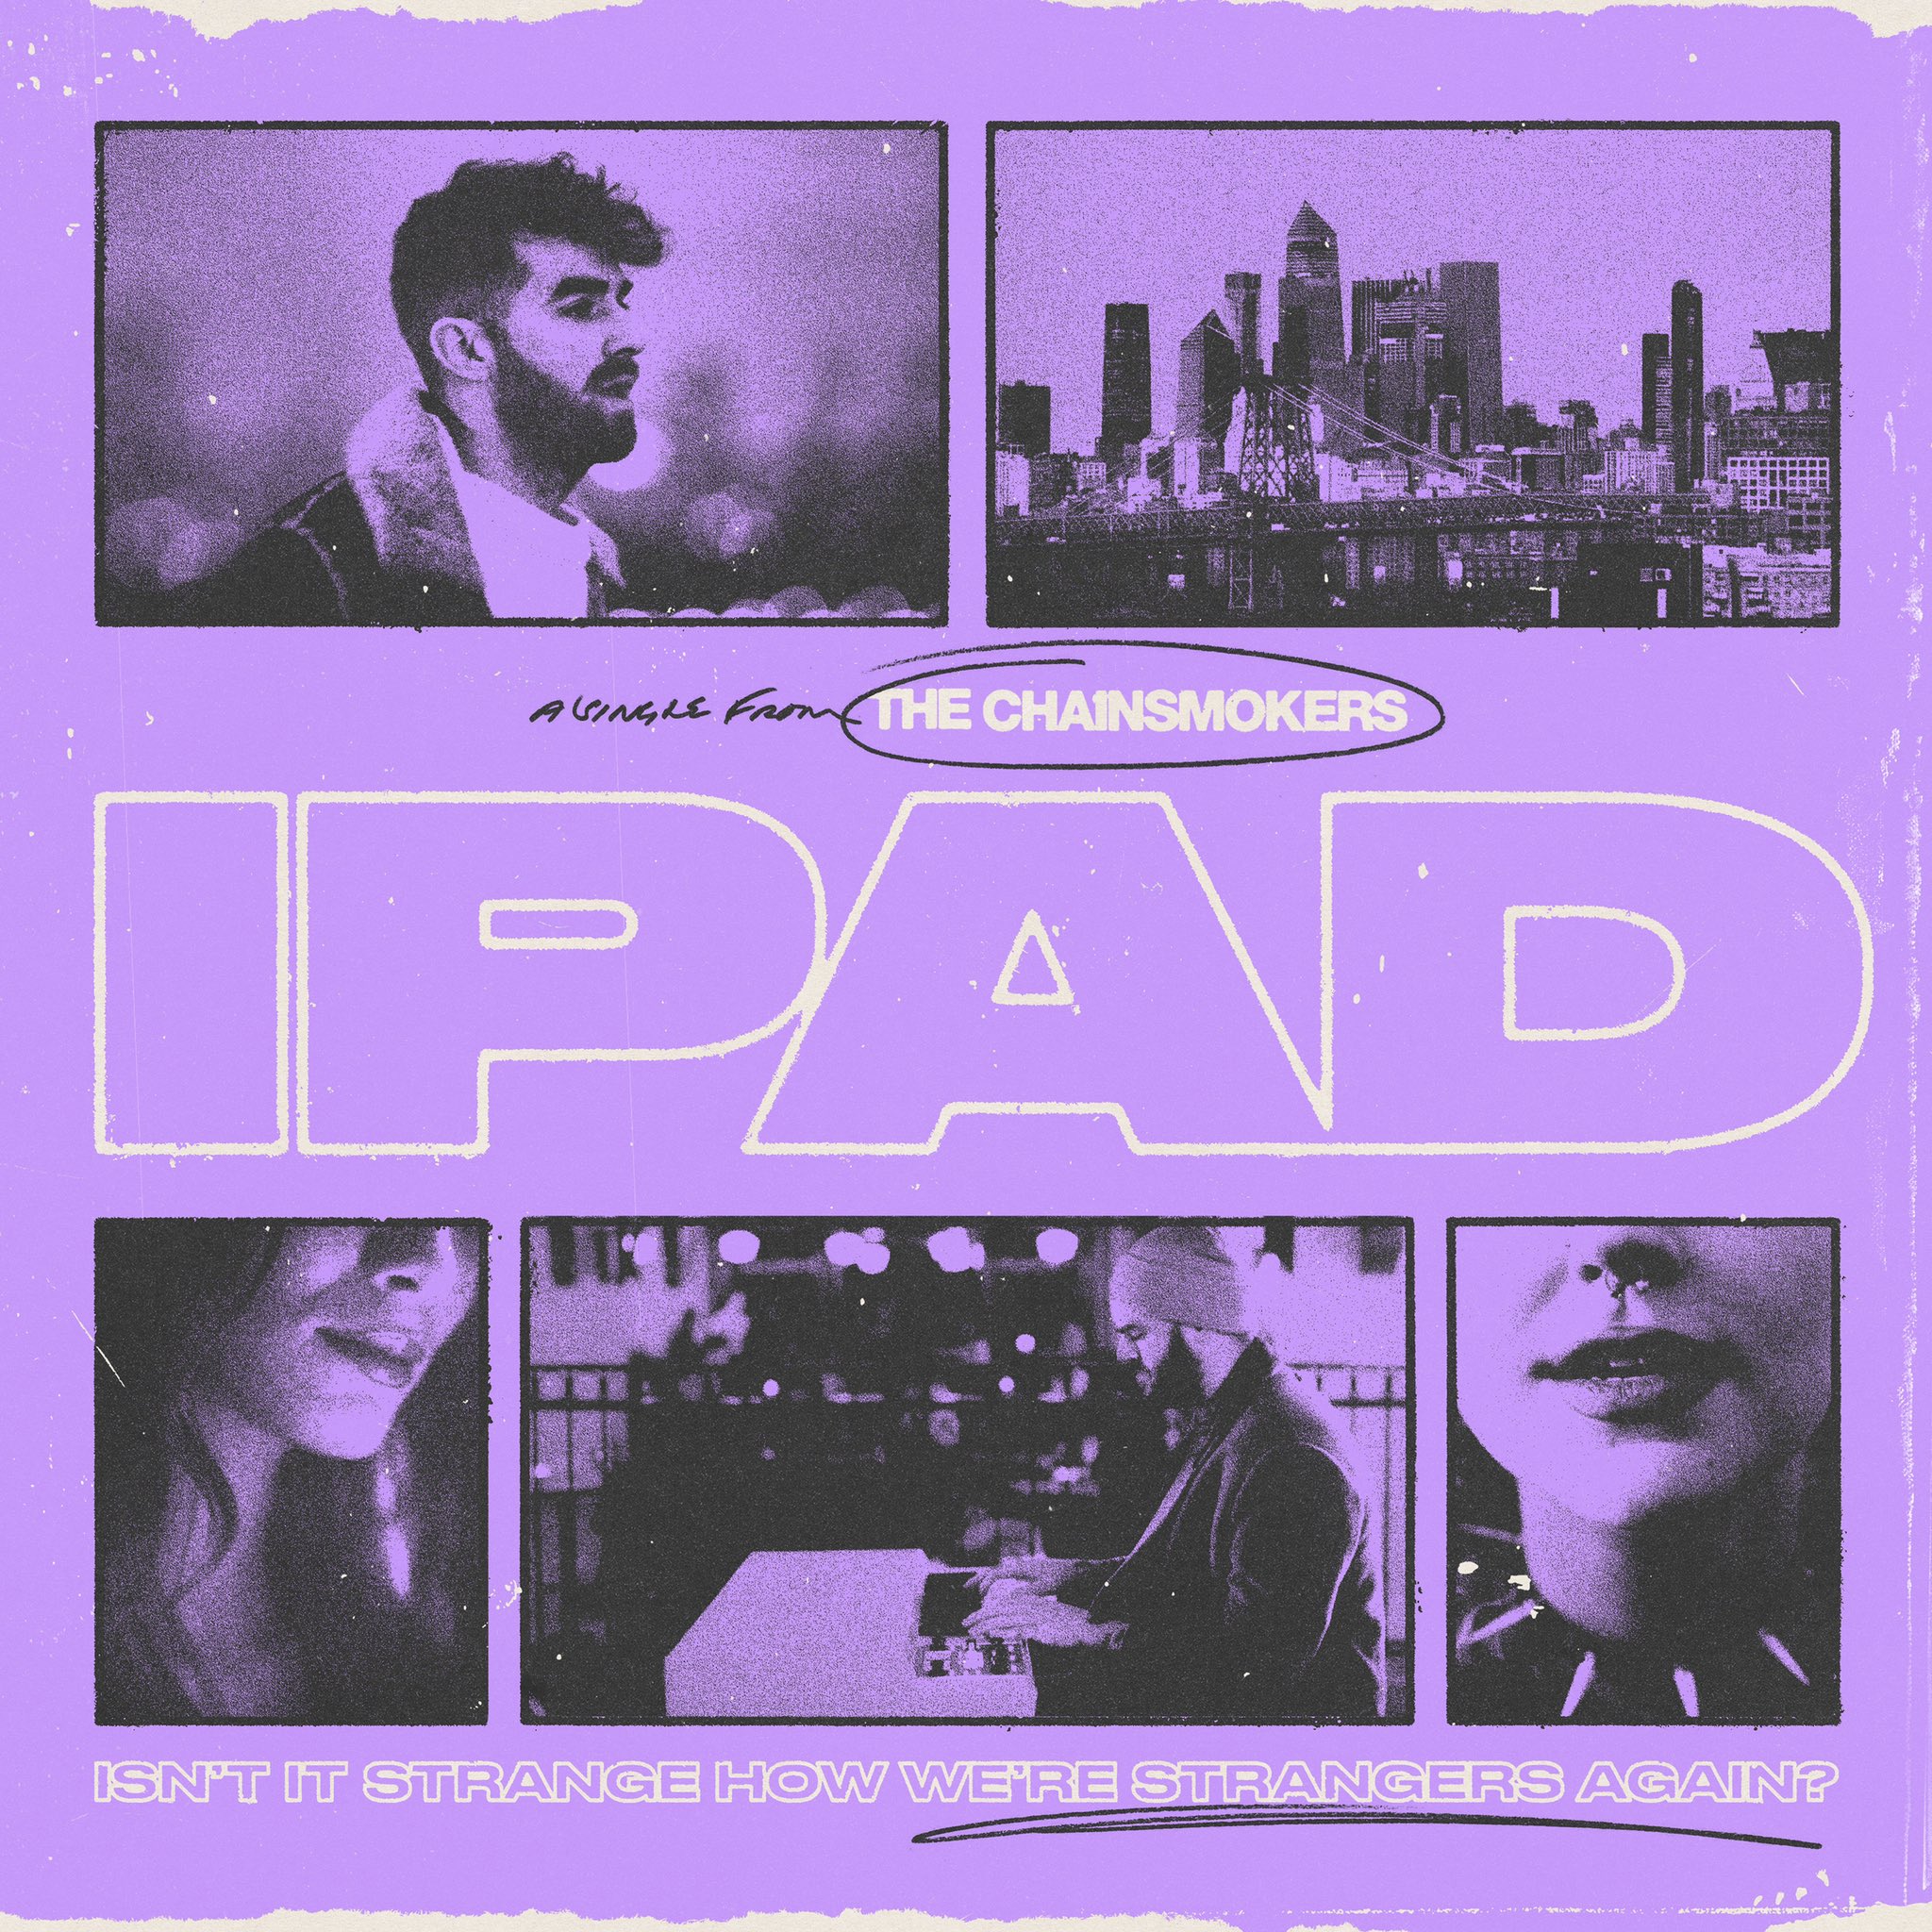 The Chainsmokers drop new song ‘iPad’